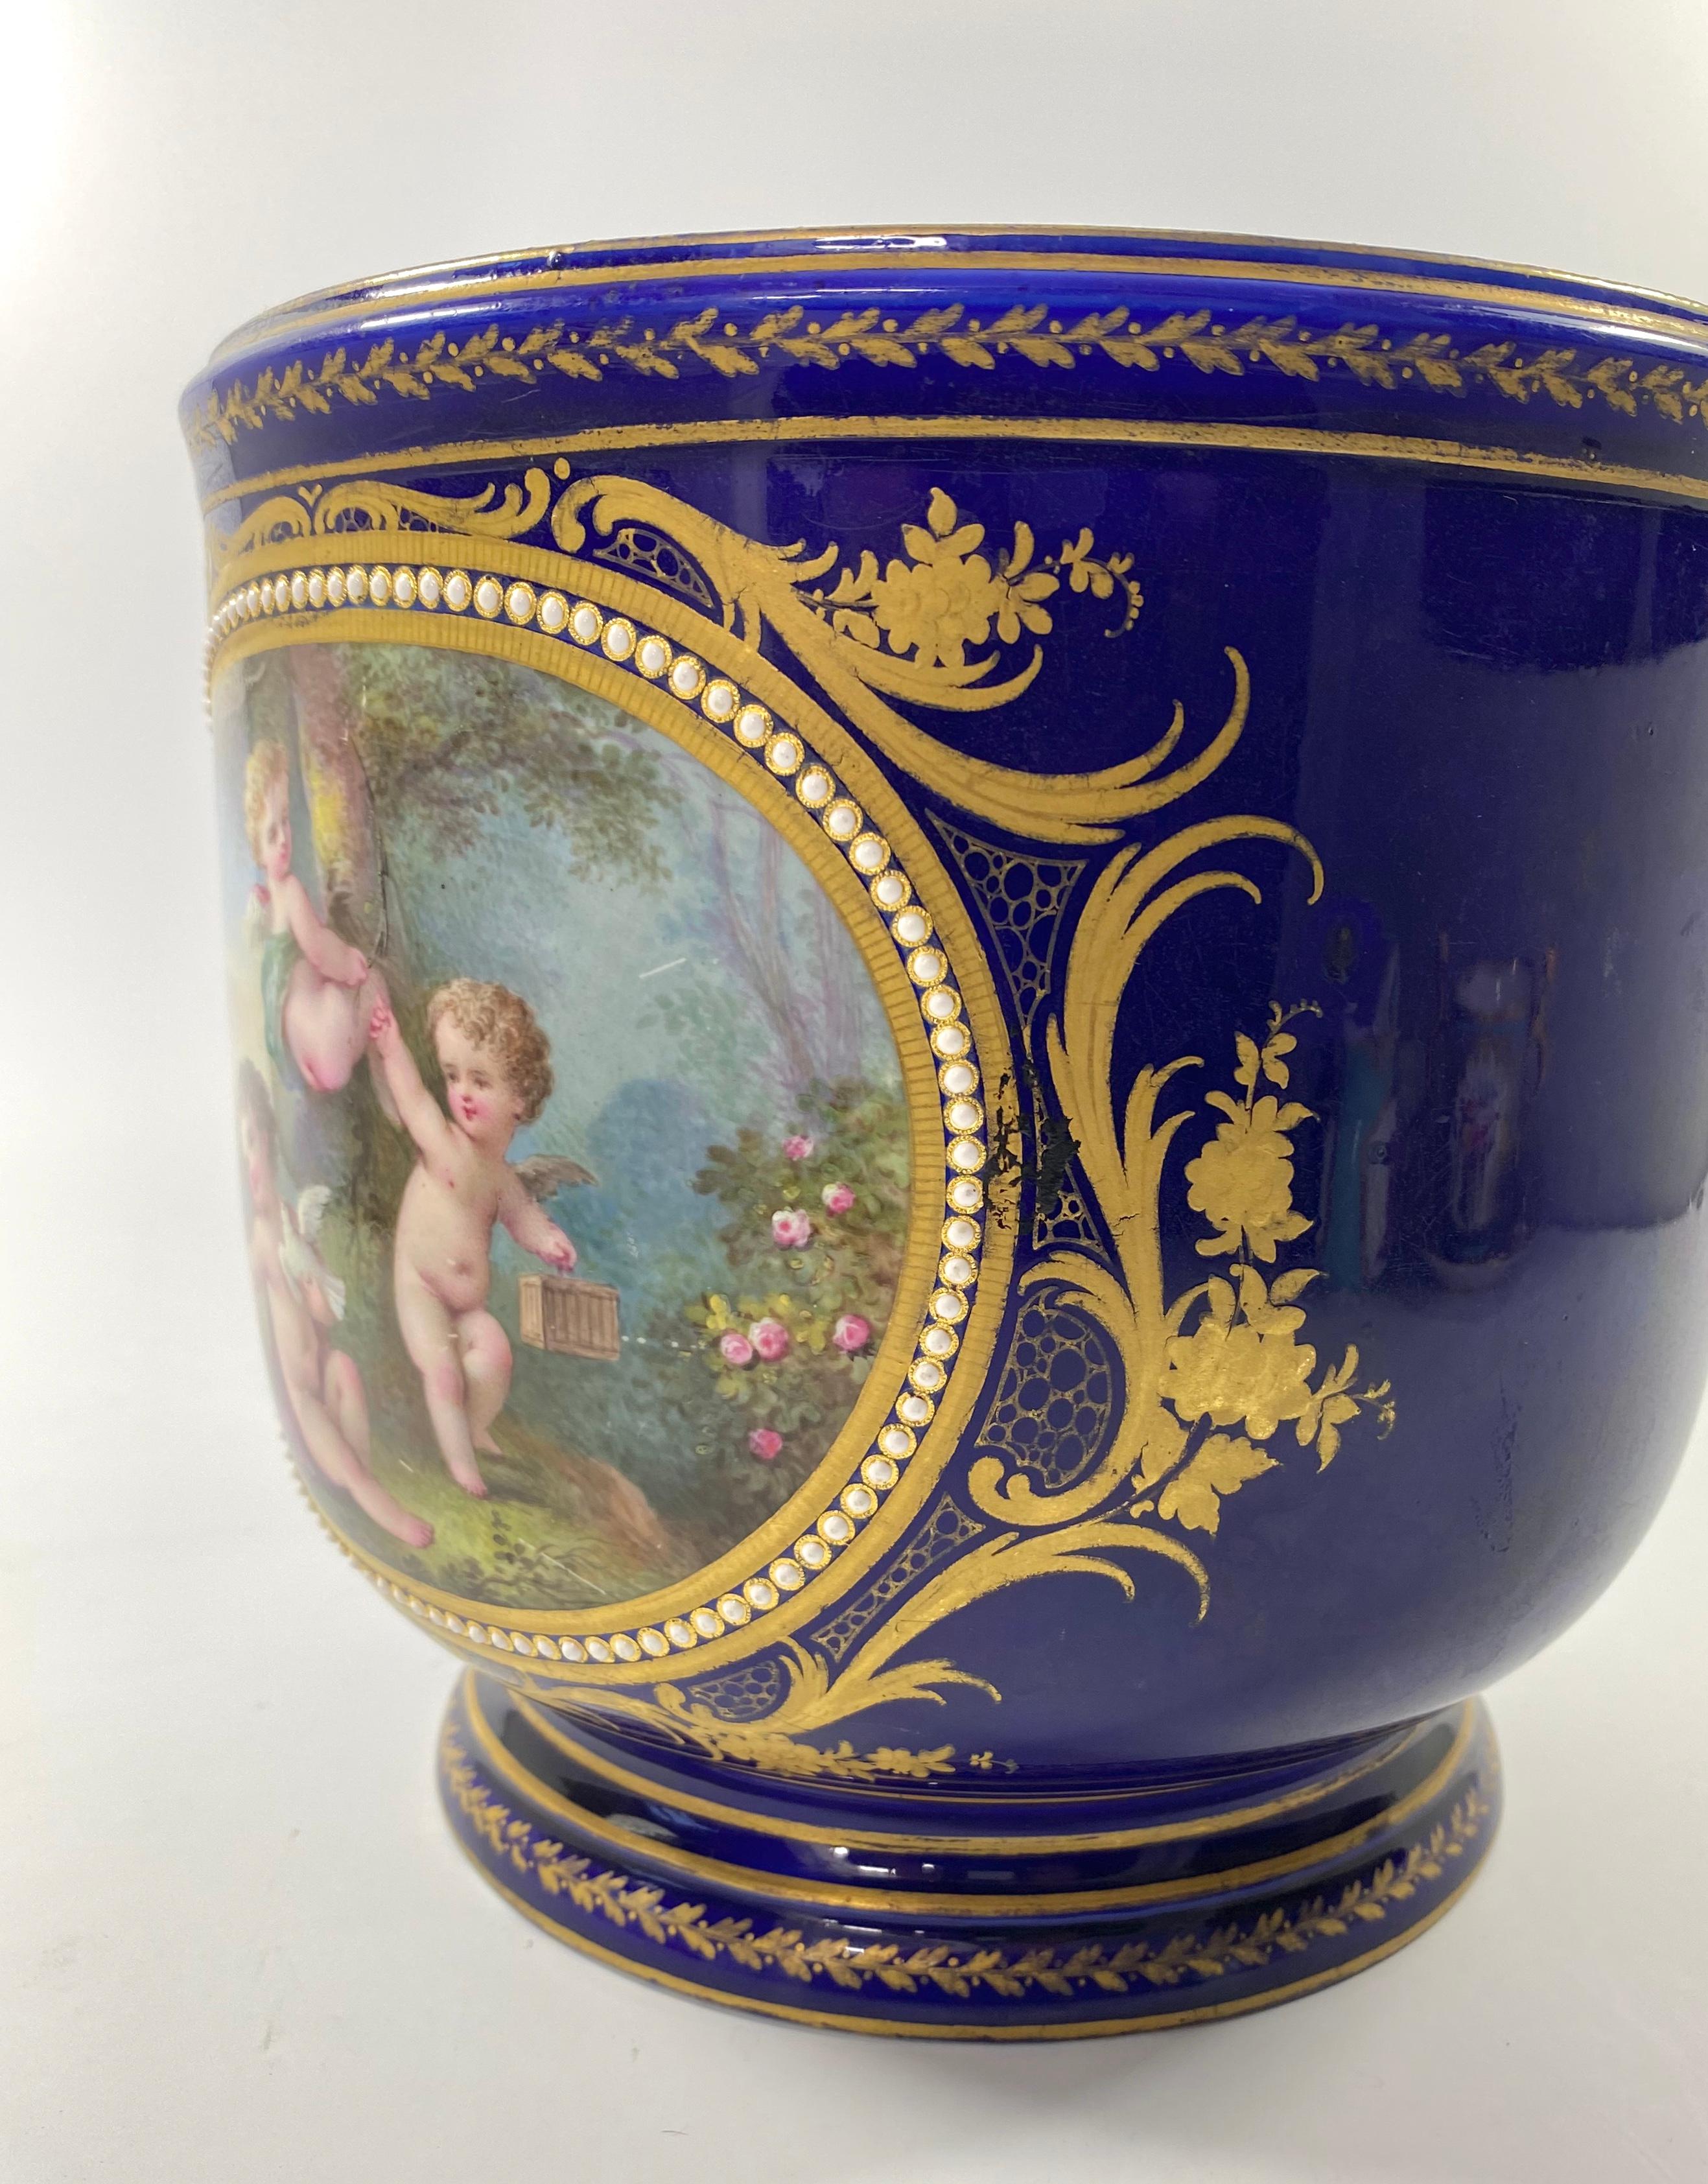 French ‘Sevres’ Porcelain Jewelled Cache Pot, c. 1870